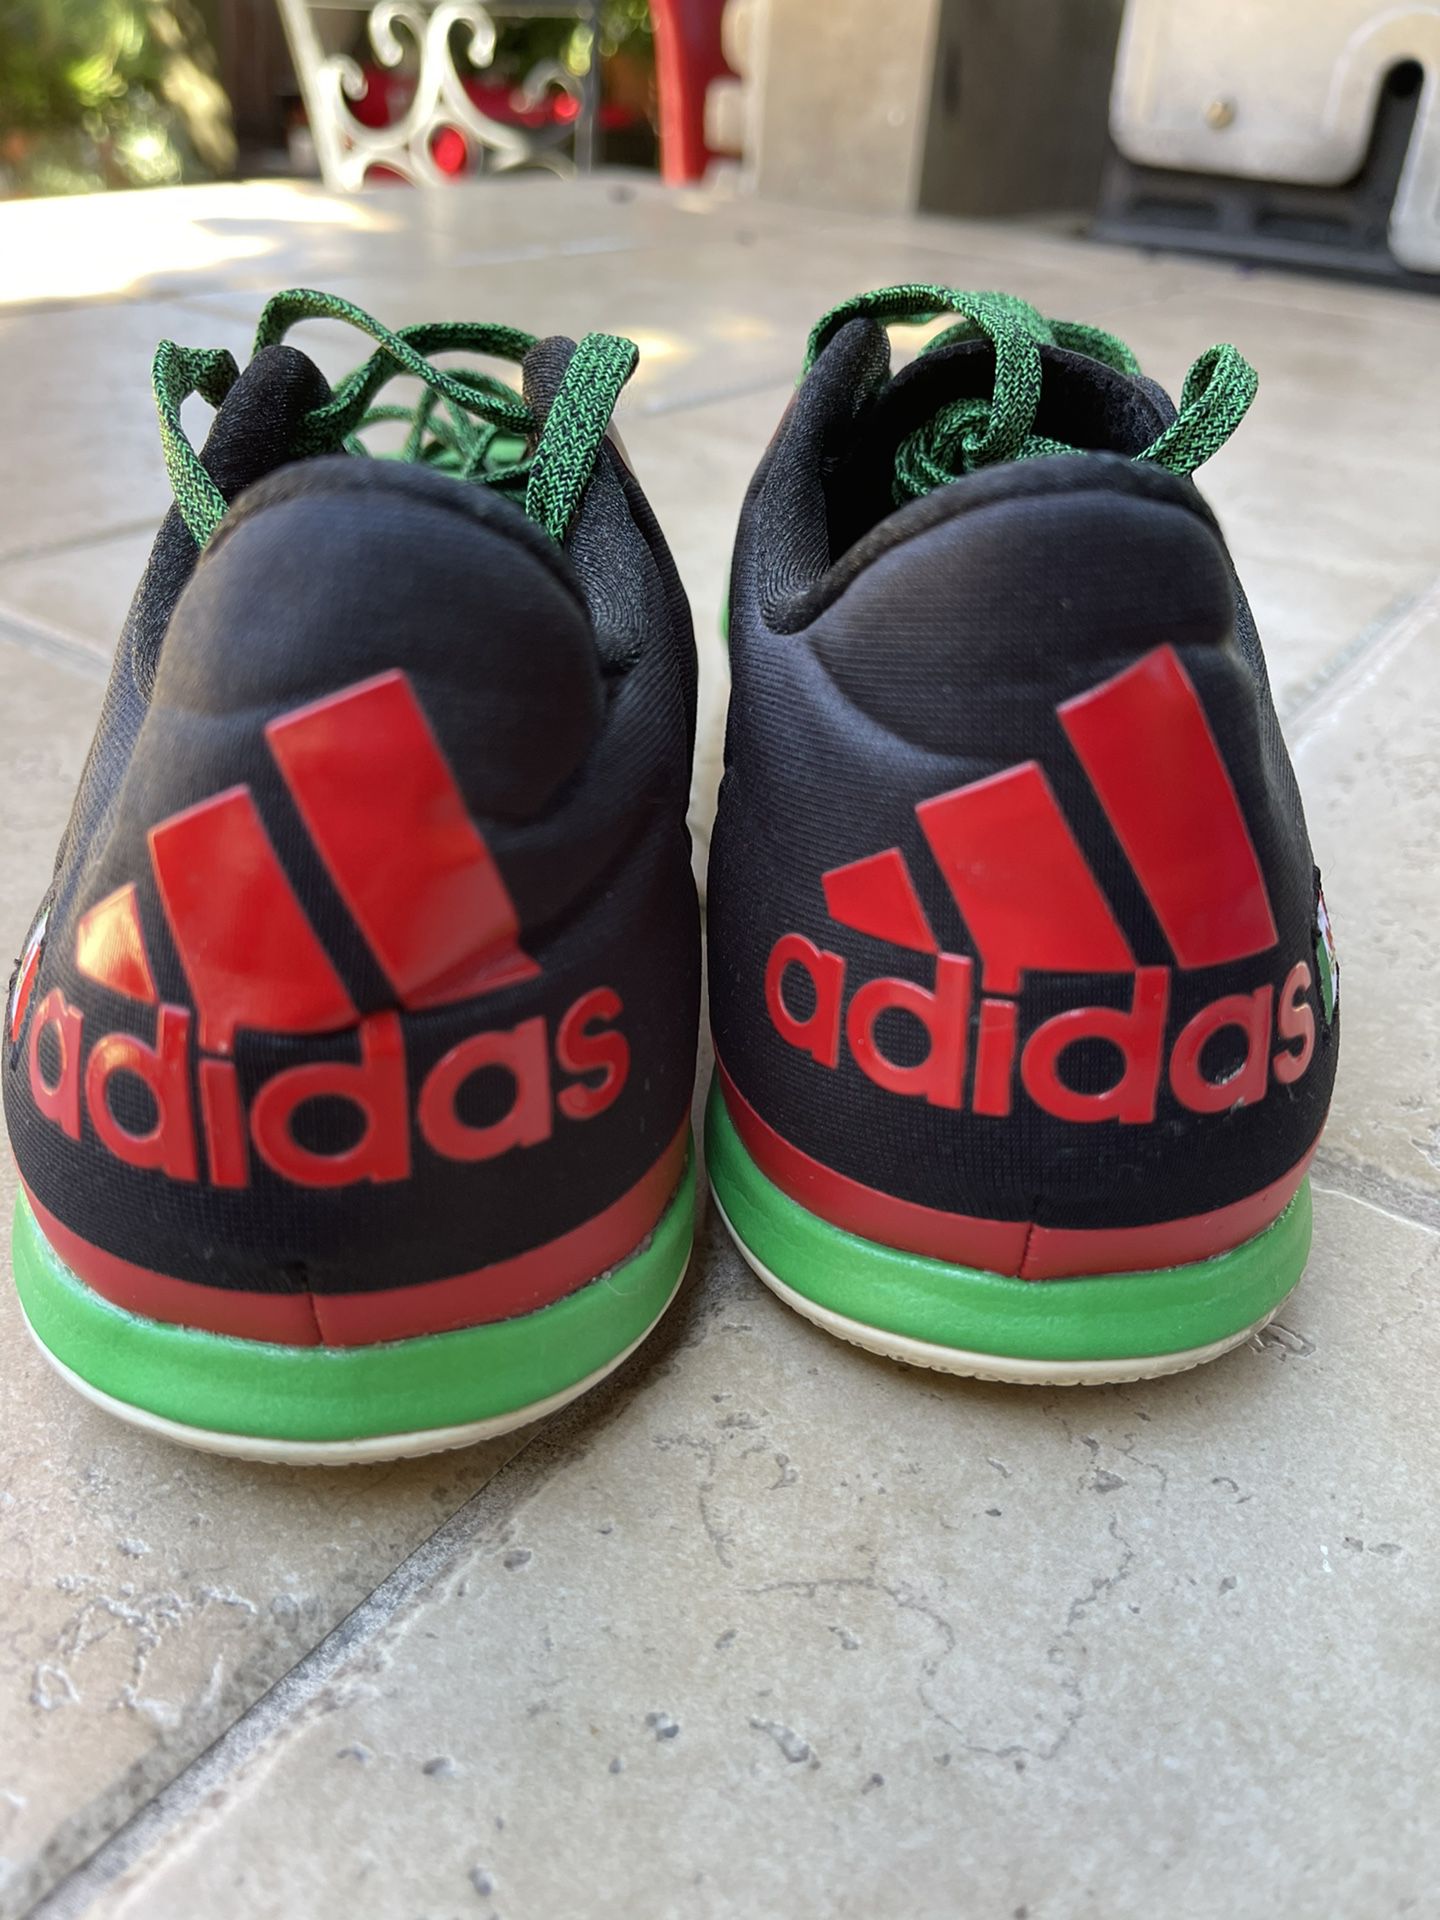 ADIDAS MEXICO SHOES SIZE 11 for Sale in Sunnyvale, CA - OfferUp